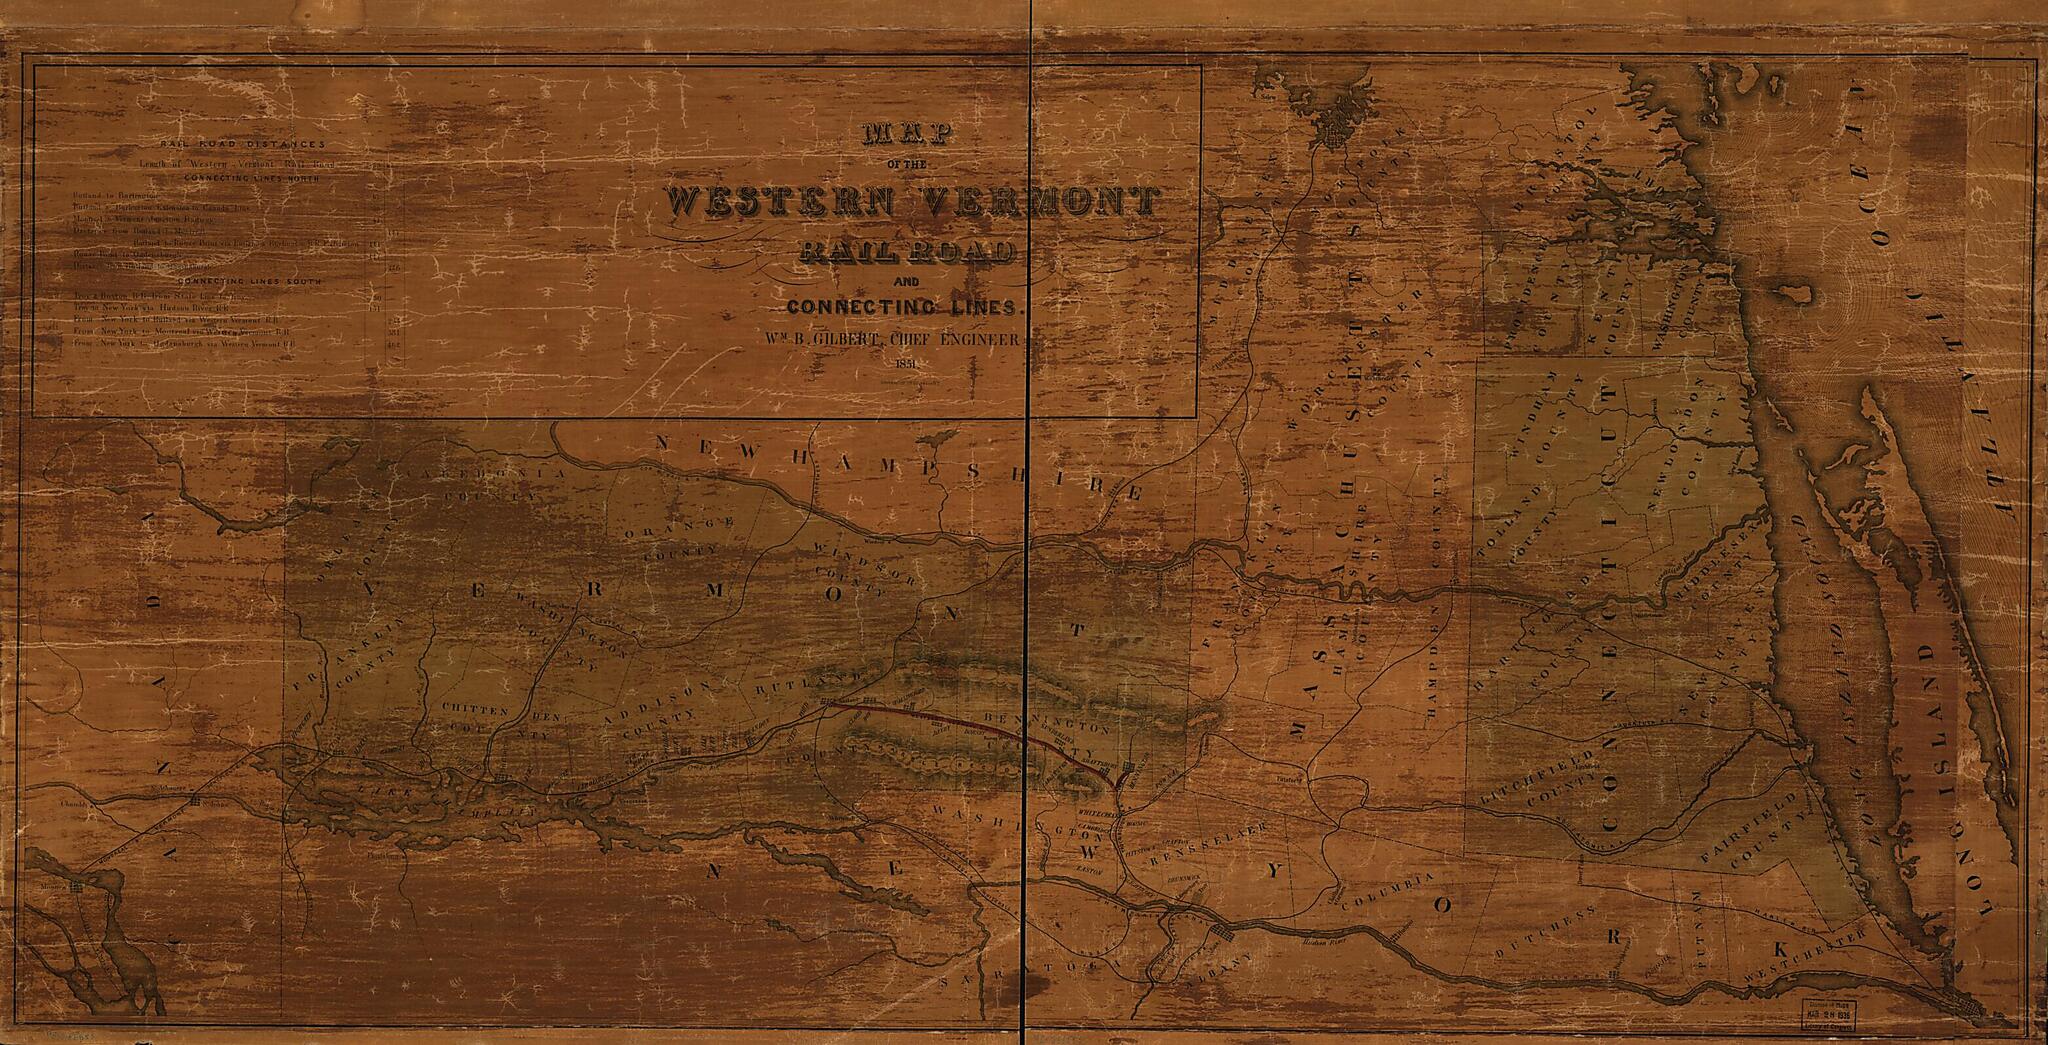 This old map of Map of the Western Vermont Rail Road and Connecting Lines, Wm. B. Gilbert, Chief Engineer from 1851 was created by William B. Gilbert,  Western Vermont Railroad in 1851